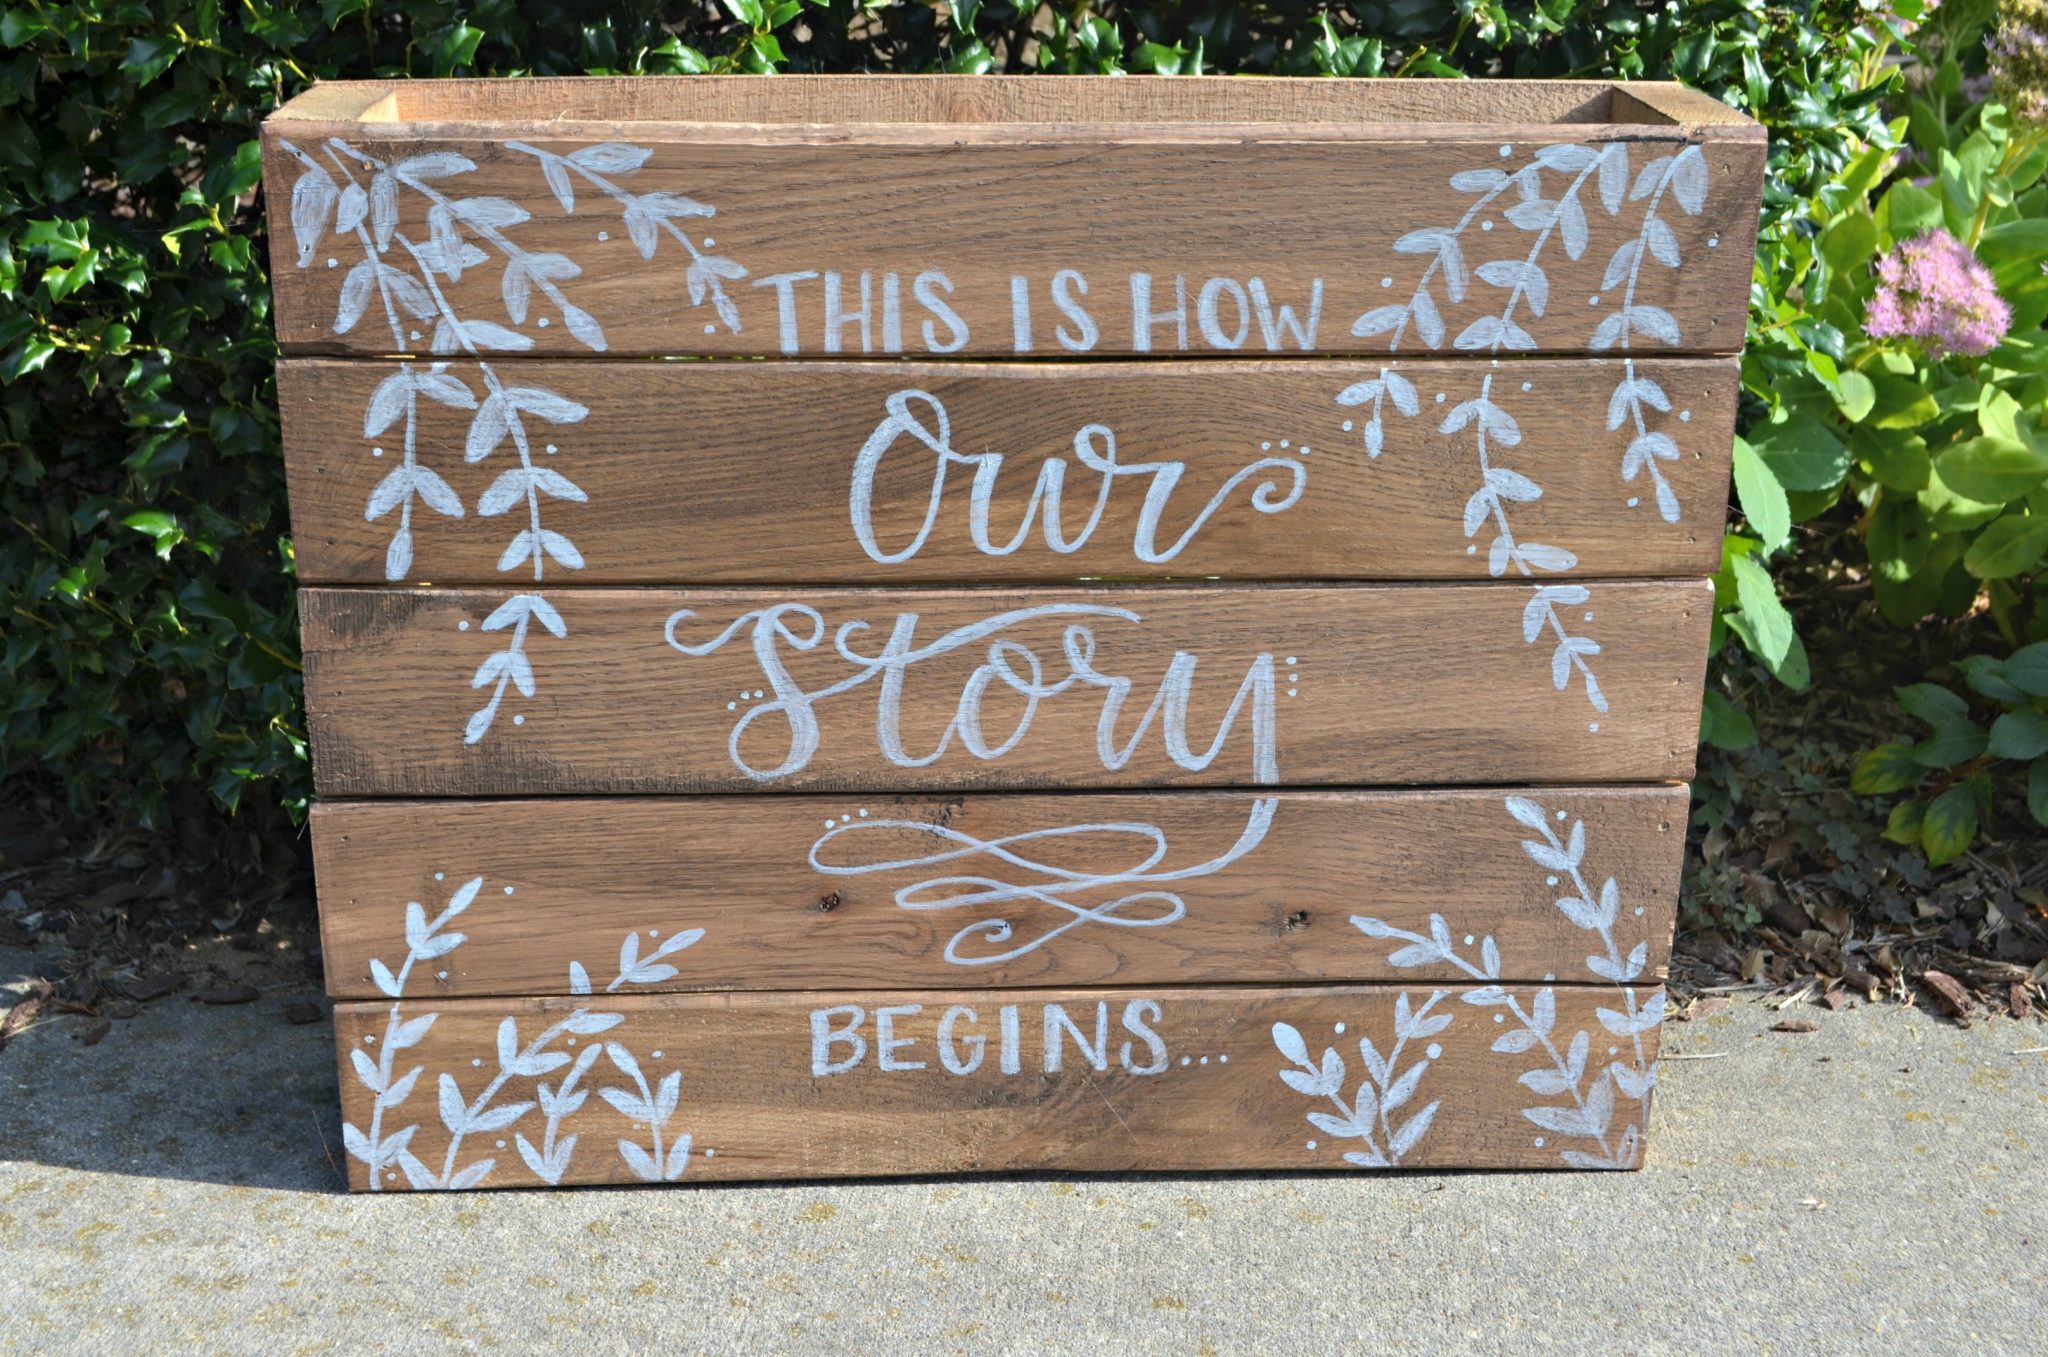 Rustic Wedding Sign: Our Story Begins